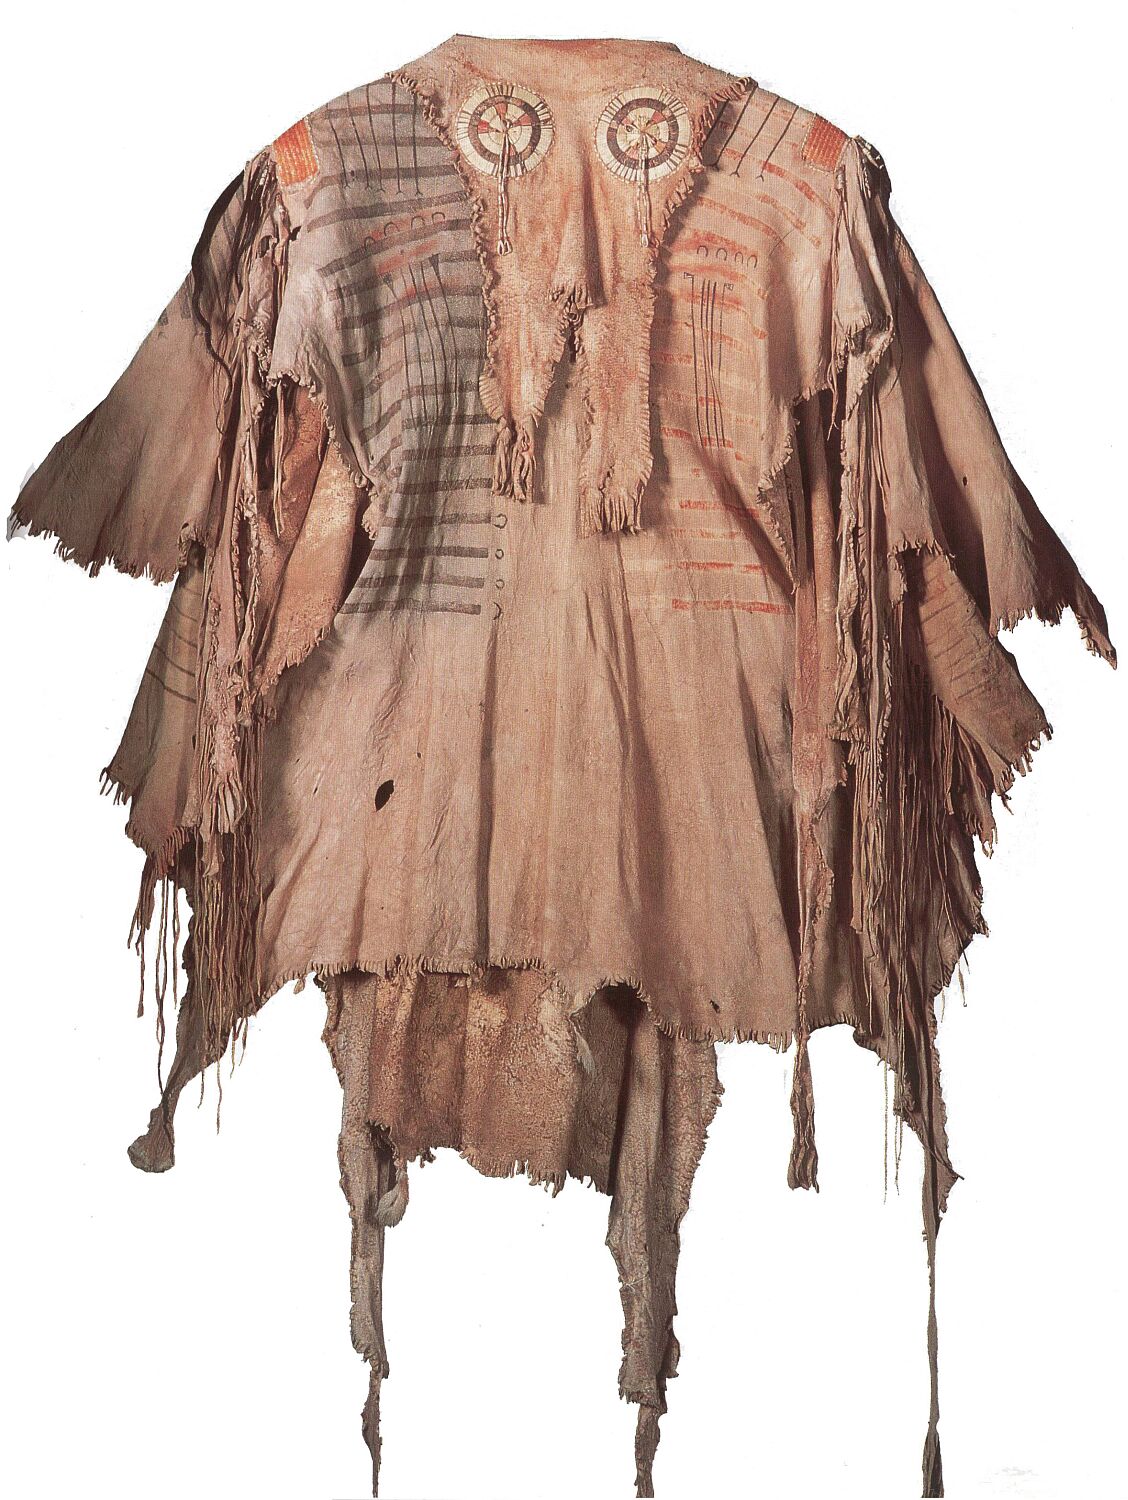 A Blackfoot war shirt from before 1820. The bib has a natural neck shape and is decorated with quilled rosettes.